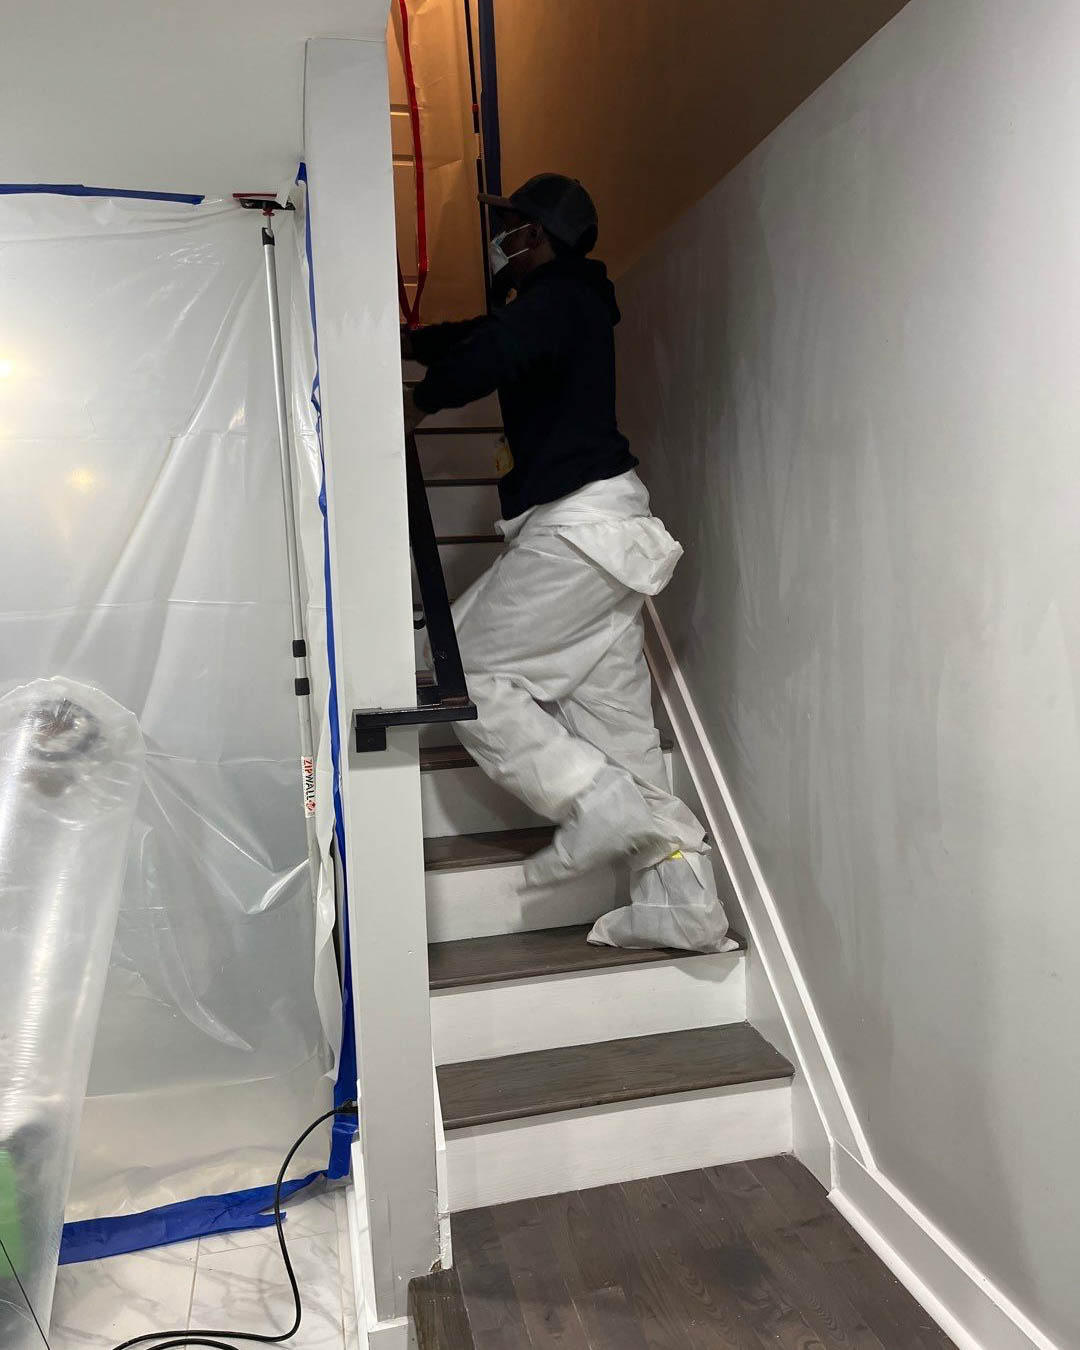 We are delighted to assist you with your mold cleanup need. Call SERVPRO of South Philadelphia/ SE D SERVPRO of South Philadelphia / SE Delaware County Collingdale (610)237-9700